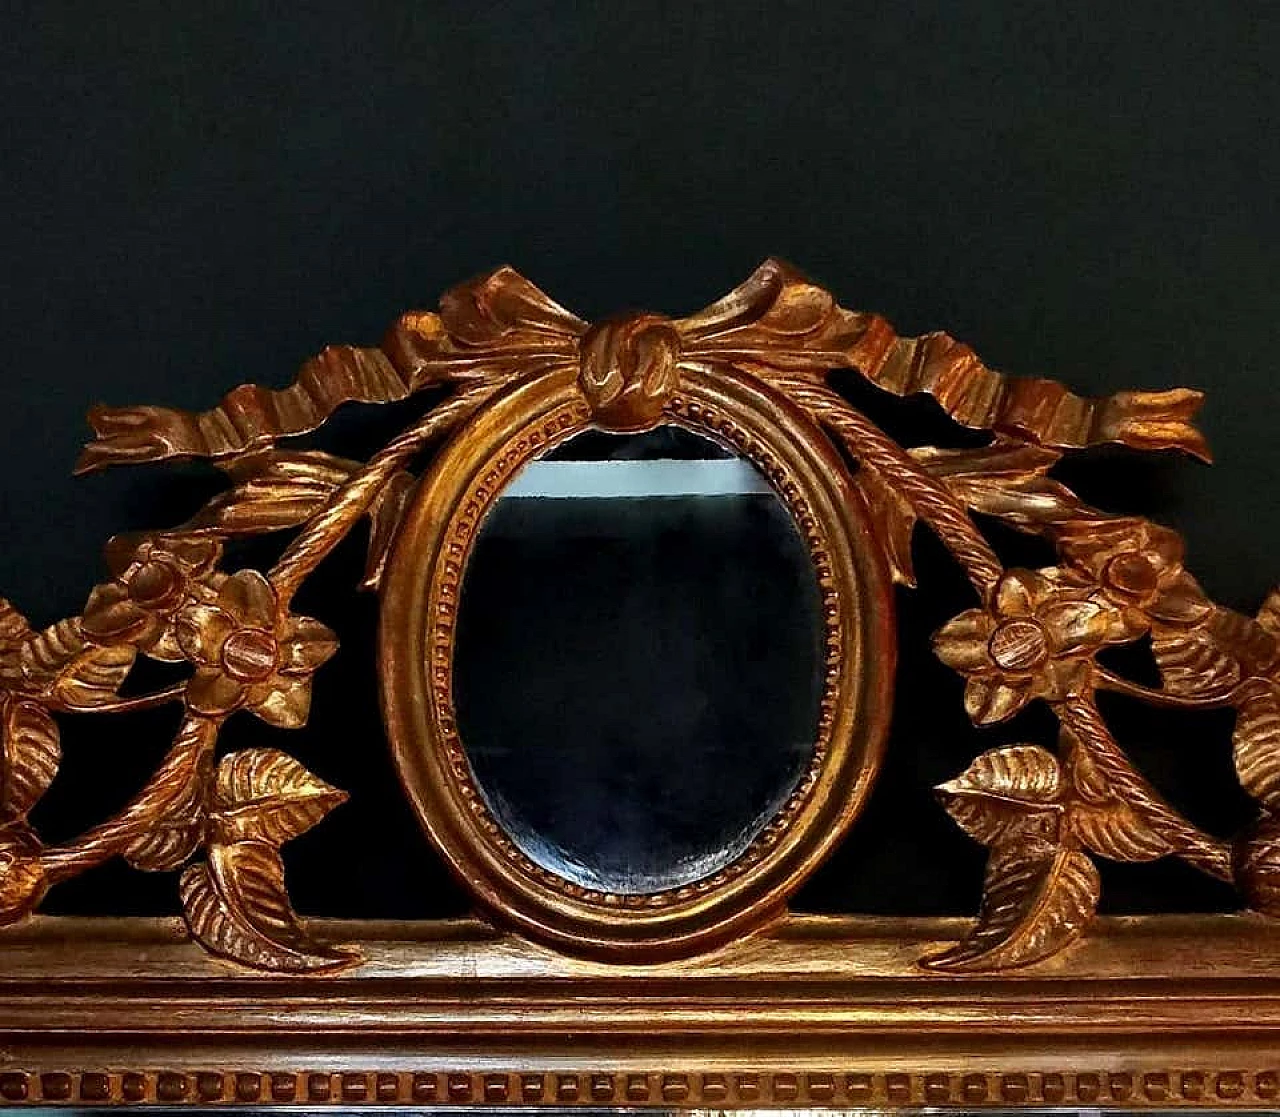 Rococo’ gilded wood frame and double mirror, 19th century 1188181